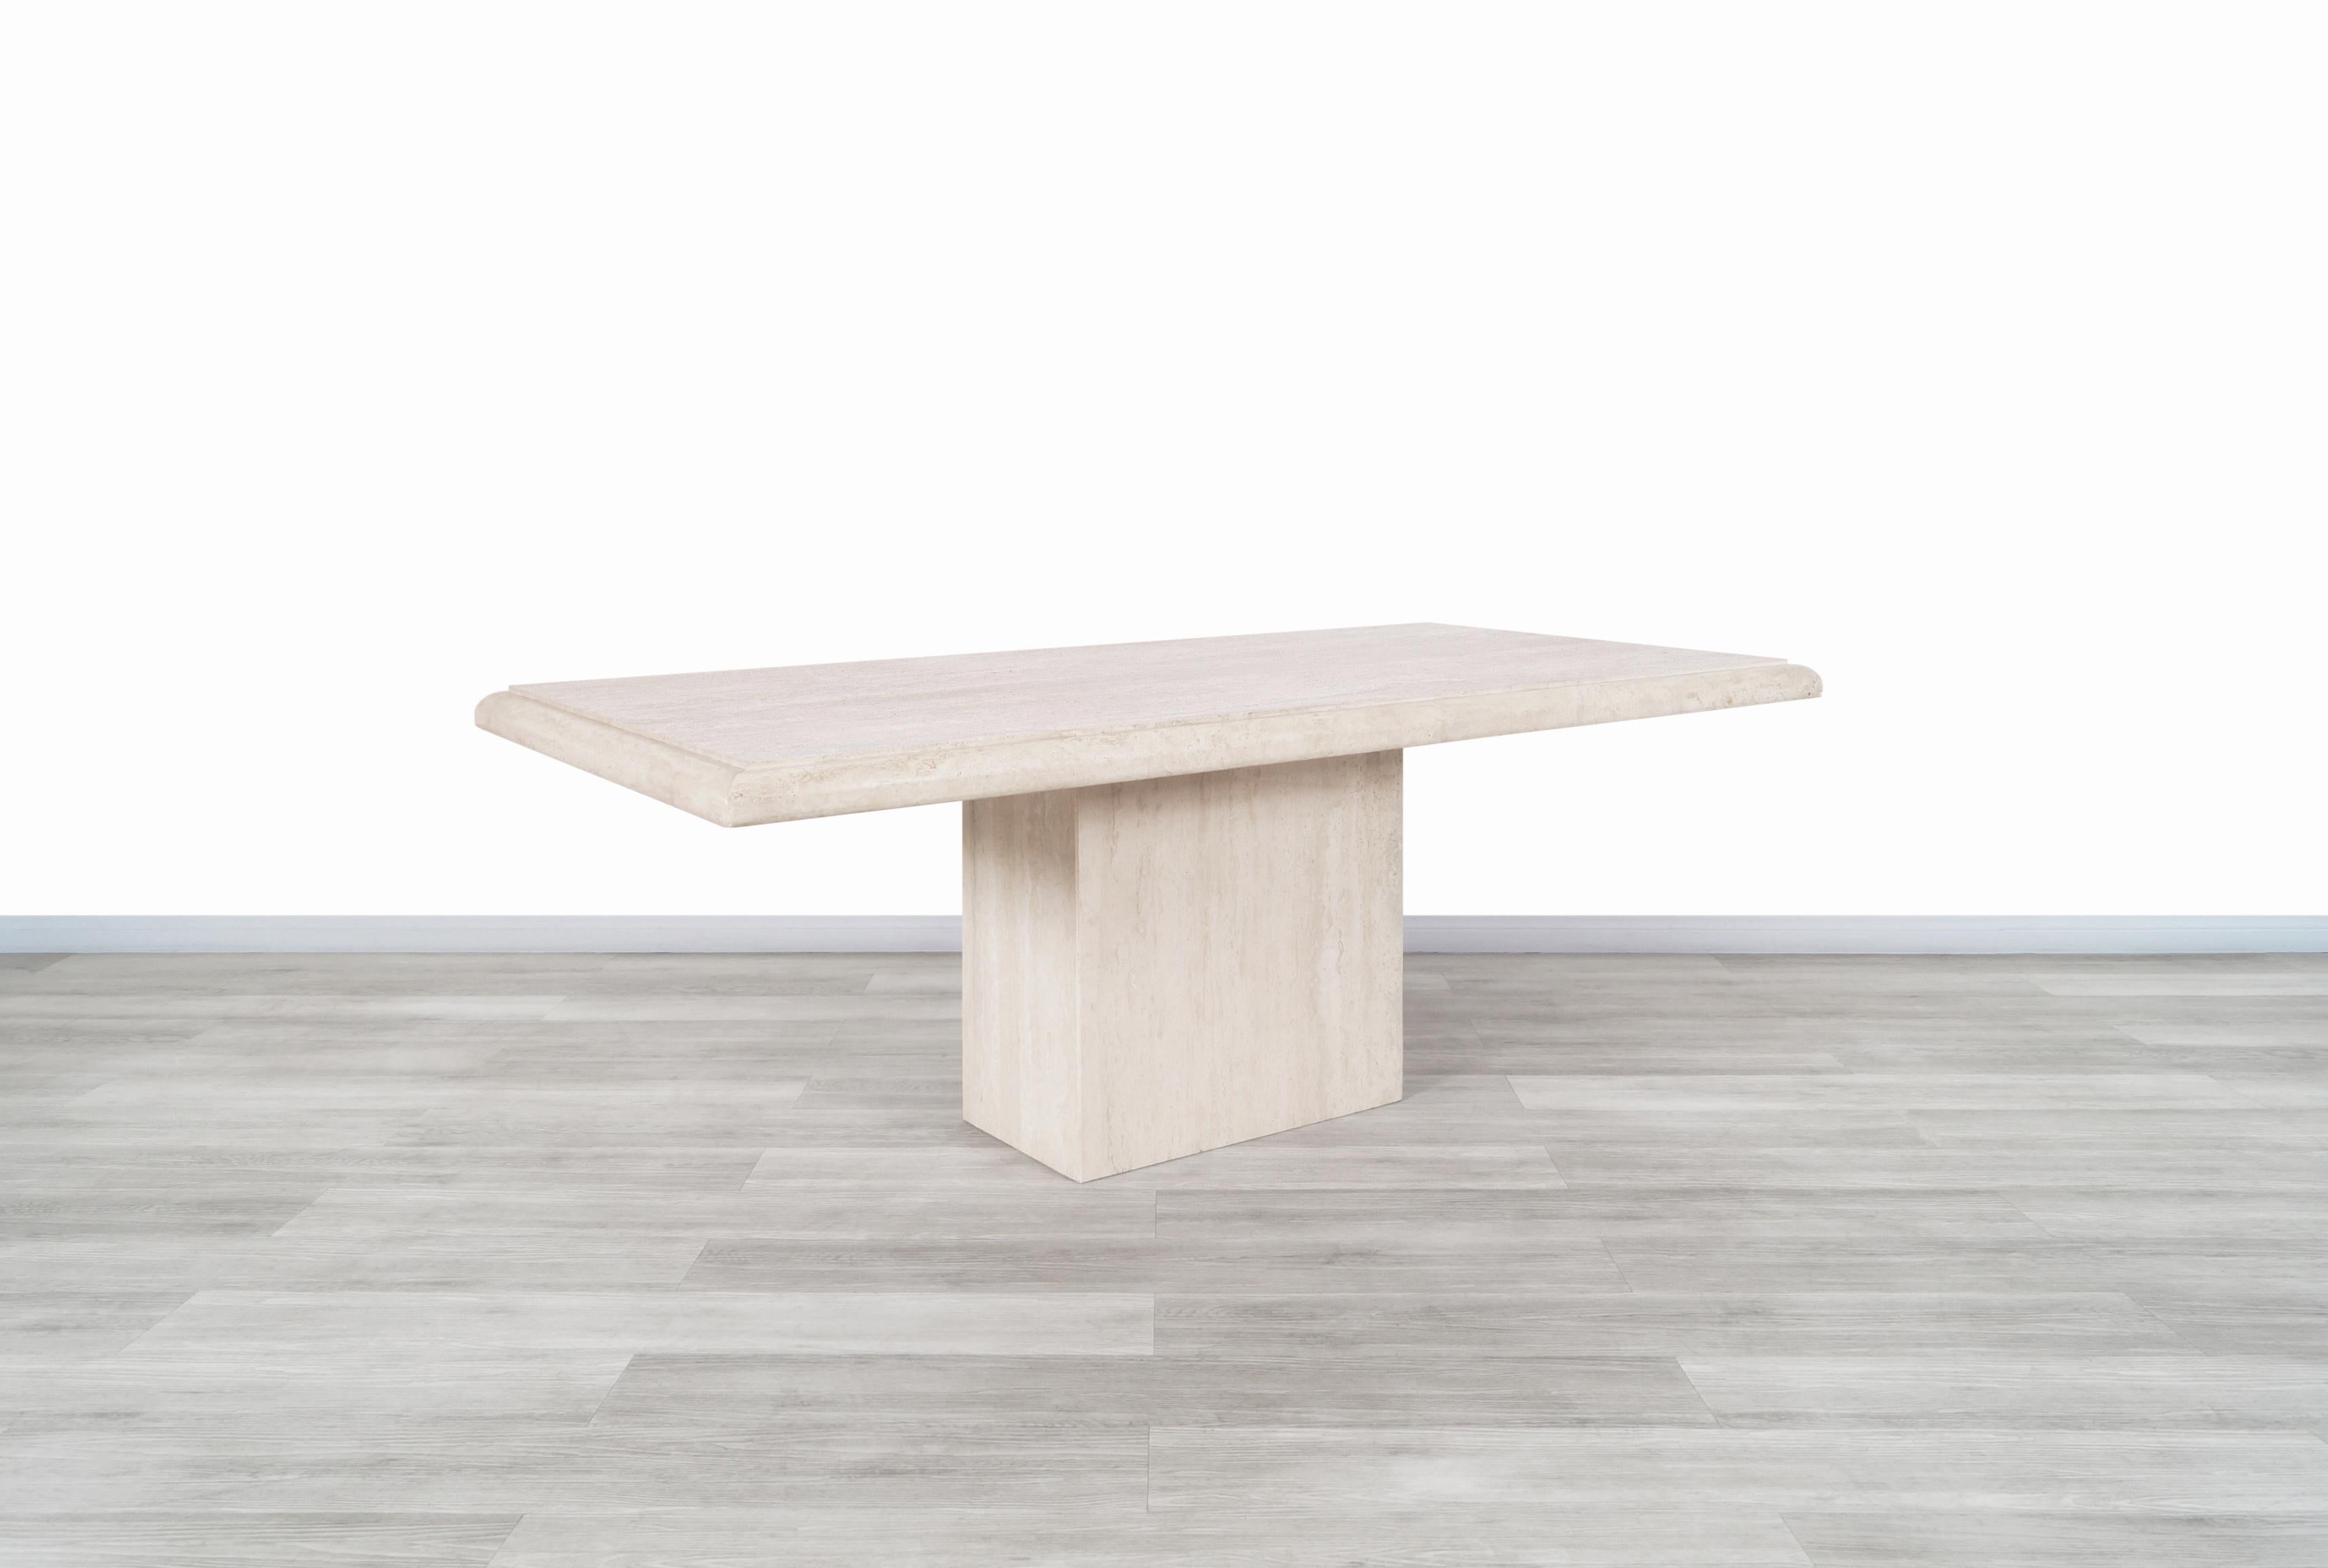 Exceptional vintage Italian travertine dining table manufactured in Italy, circa 1970s. This table has a design typical of the time and the place of manufacture where the minerals that make up the travertine stone stand out throughout its structure.